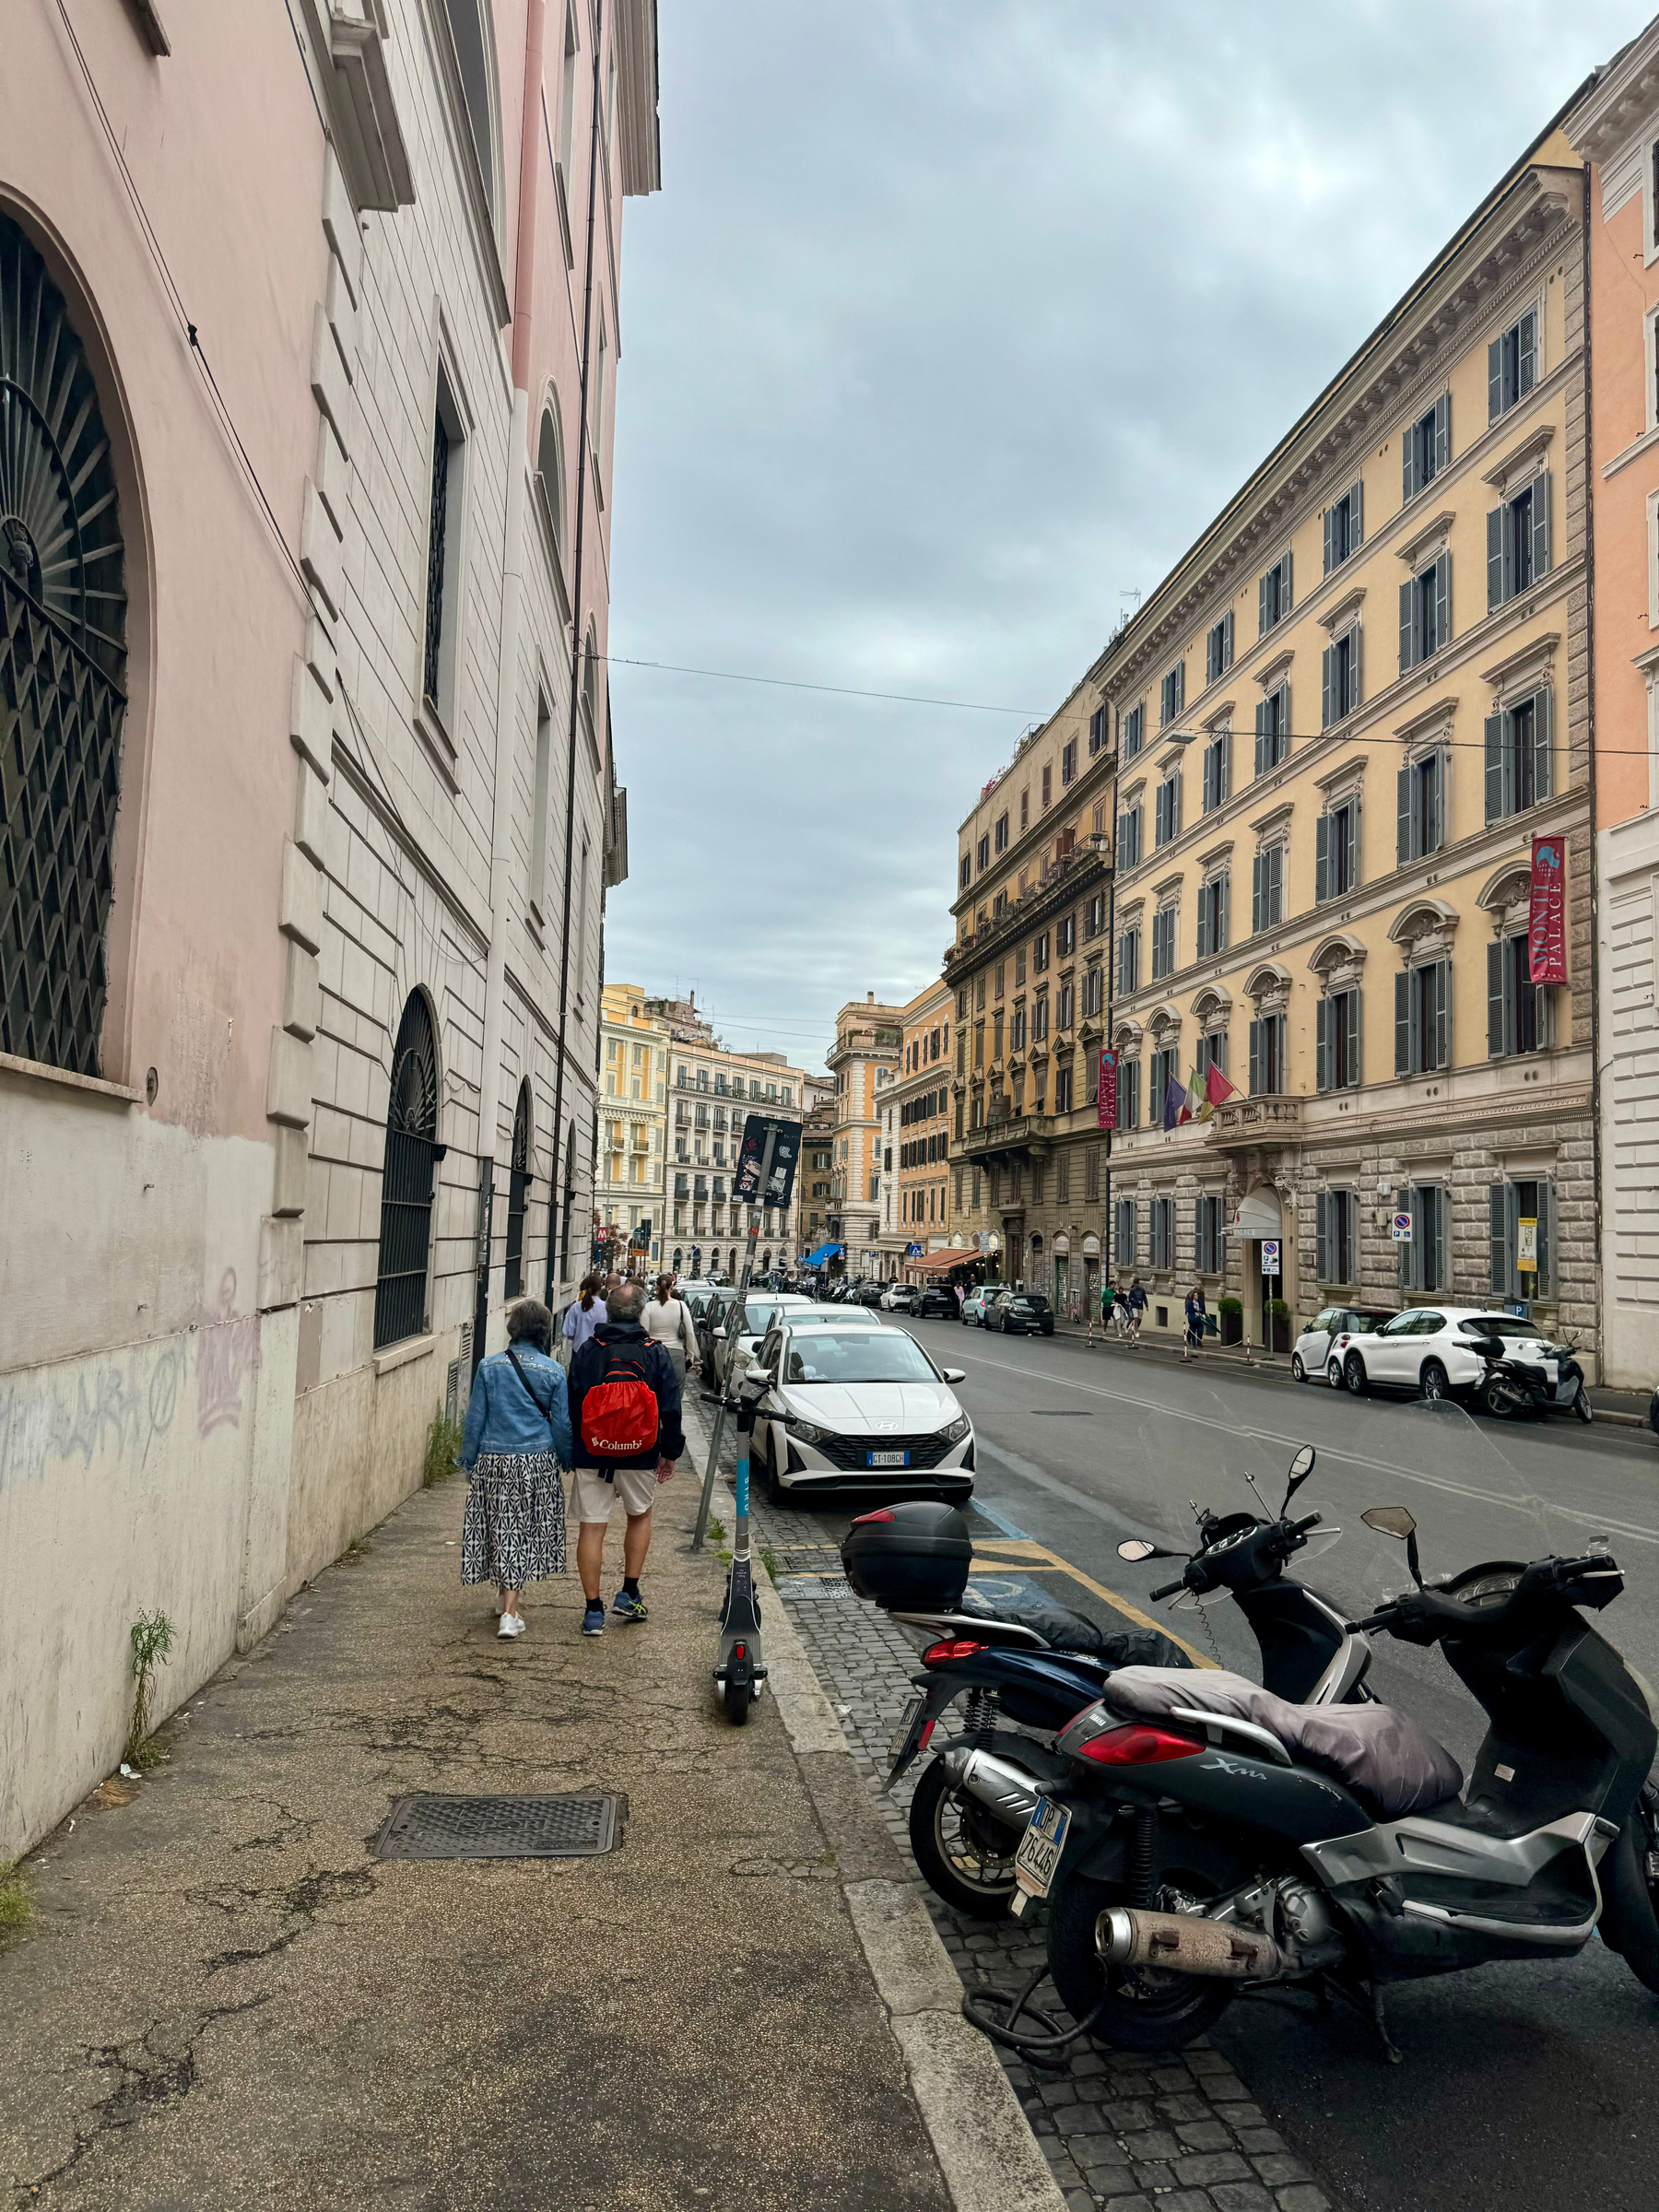 A street scene in Rome. The view shows historical buildings with classic architecture on both sides. Scooters and motorcycles are parked along the cobblestone curb. People walk on the sidewalk under an overcast sky.